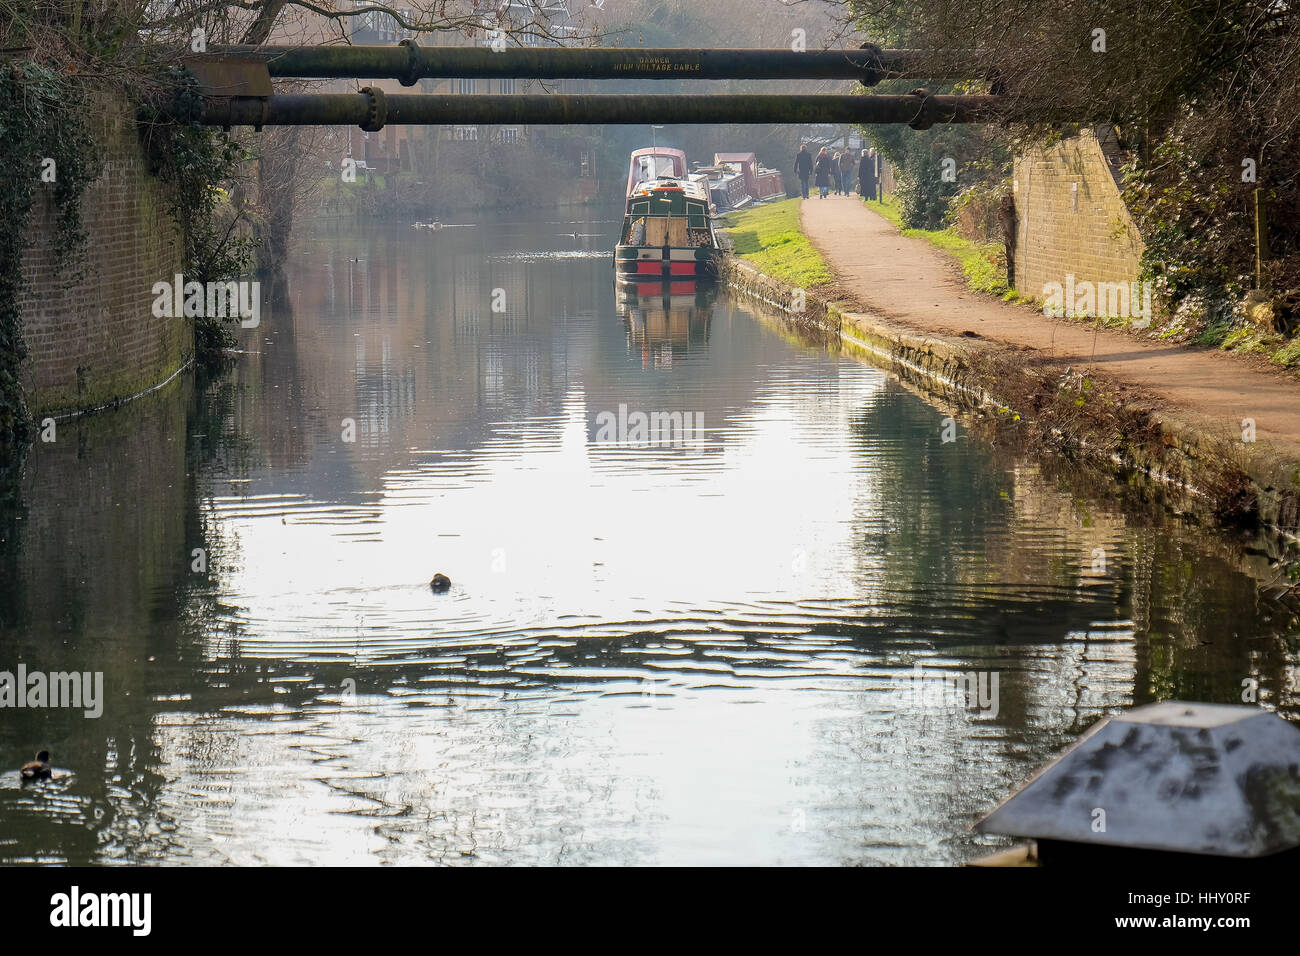 A view of a canal and canal path in Hertfordshire, England Stock Photo